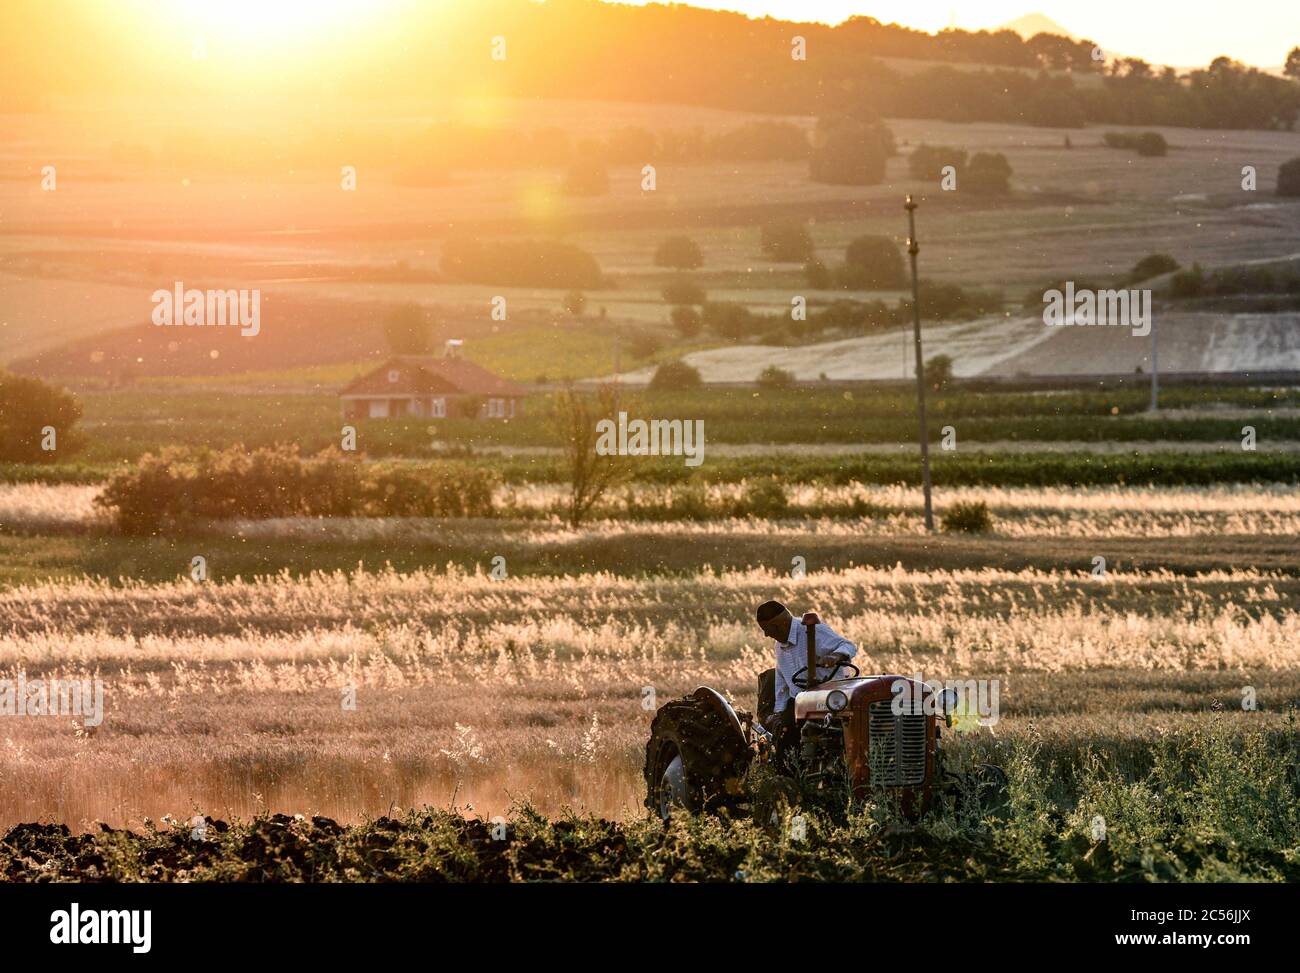 Beijing, North Macedonia. 29th June, 2020. A farmer plows a field at a village near Kumanovo, North Macedonia, on June 29, 2020. A heat wave hit North Macedonia on Monday and the temperature reached 38 degrees Celsius. Credit: Tomislav Georgiev/Xinhua/Alamy Live News Stock Photo